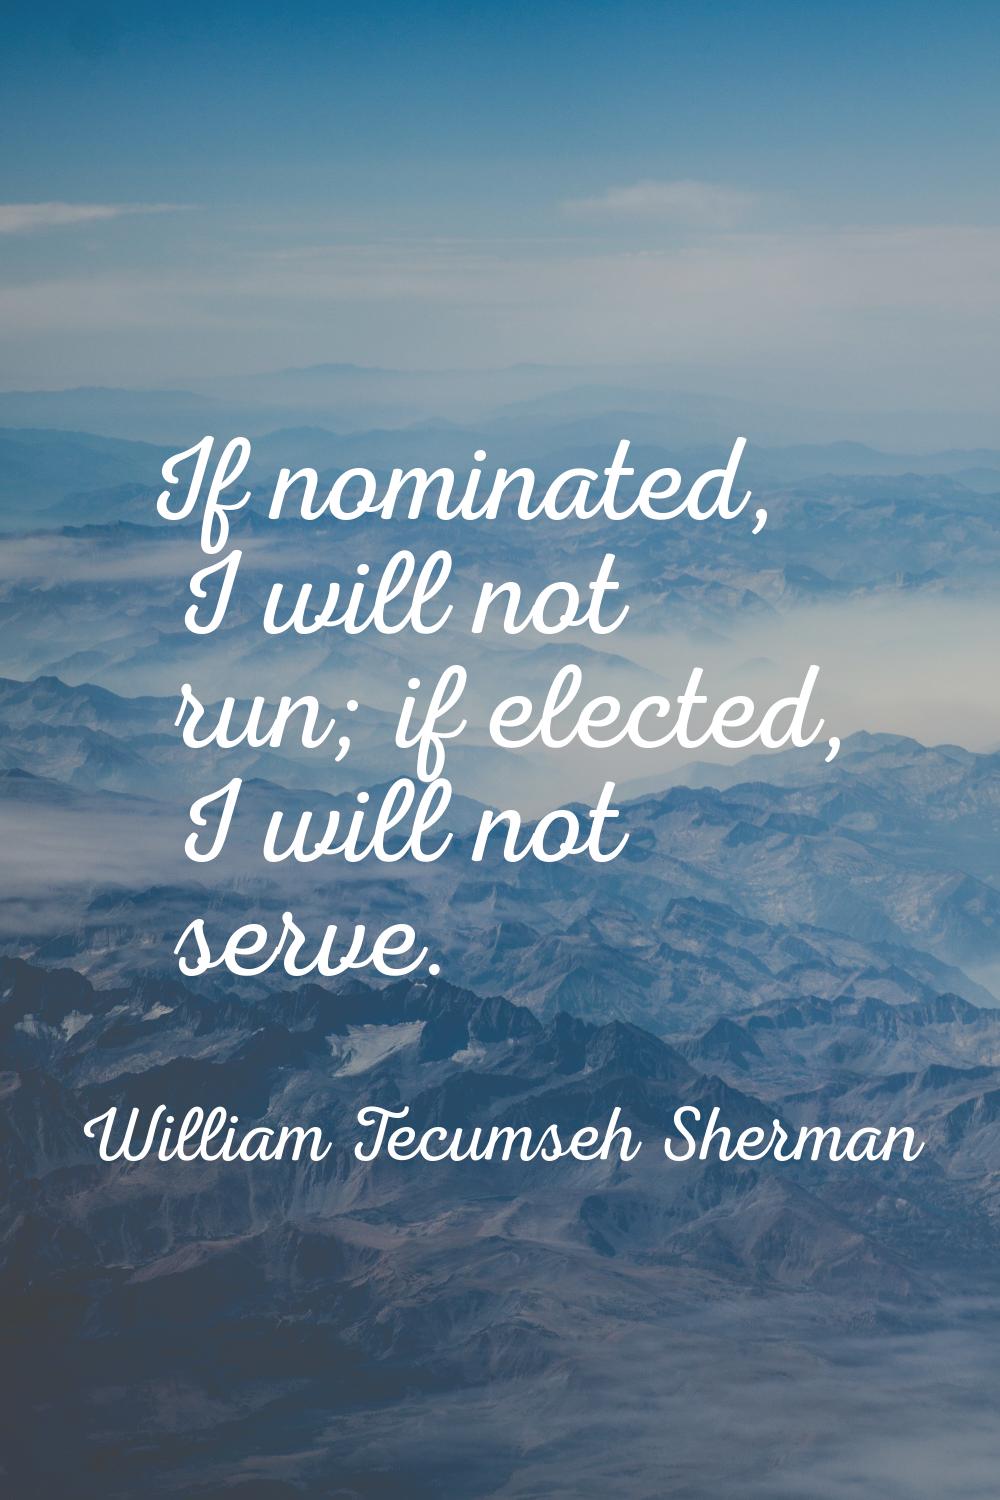 If nominated, I will not run; if elected, I will not serve.